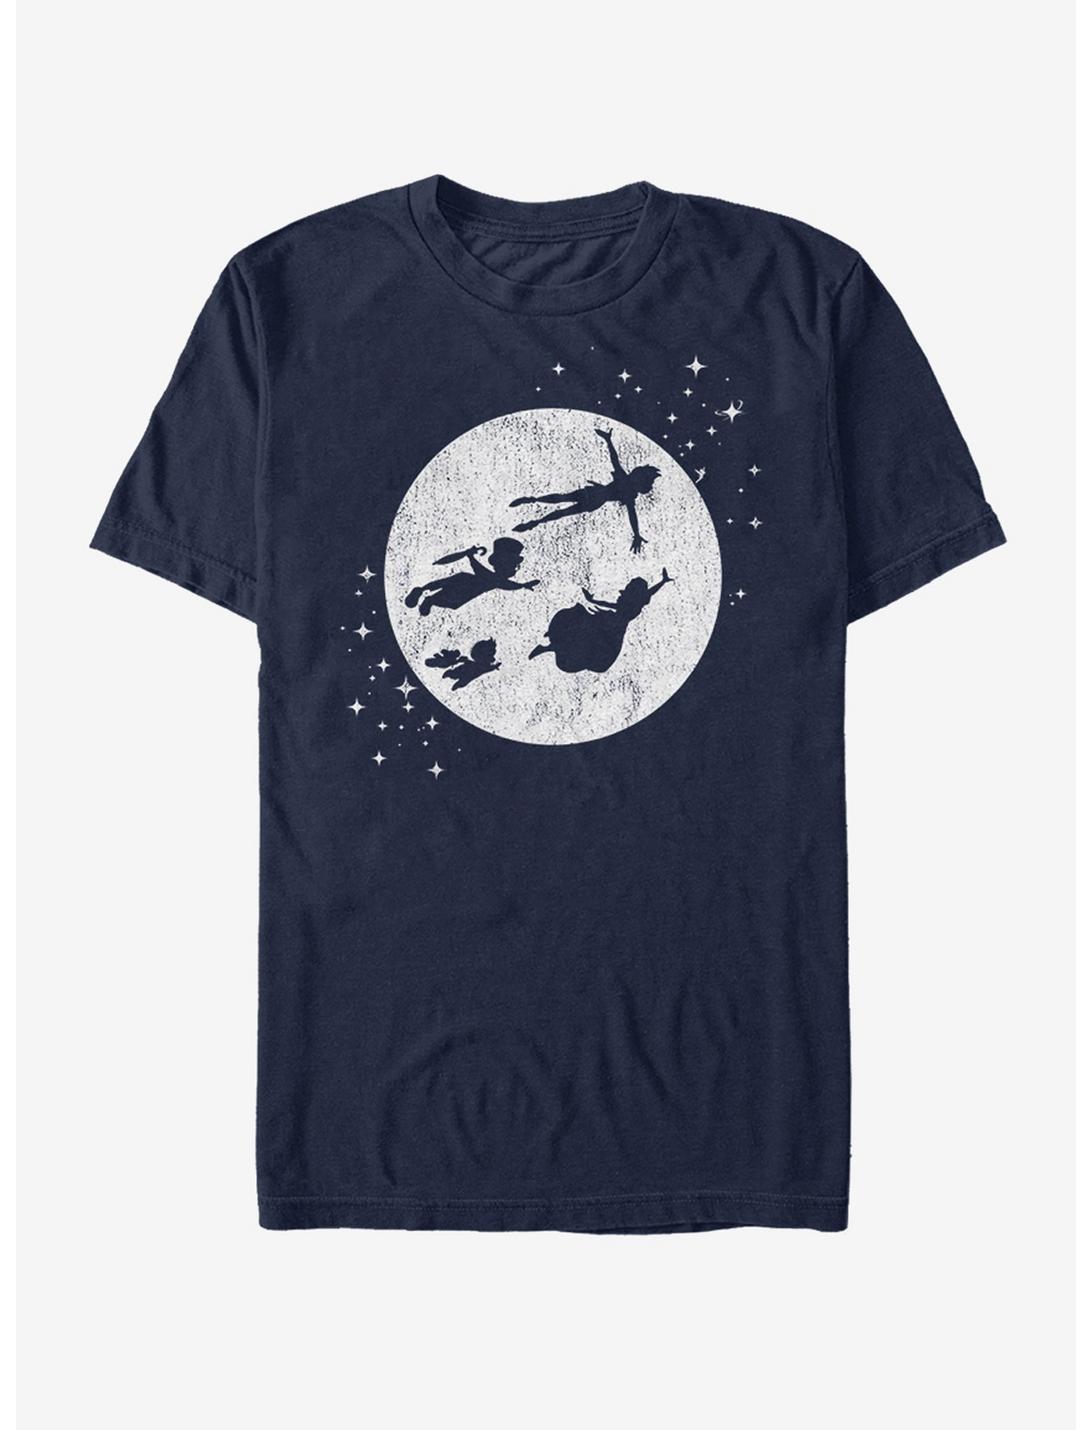 Peter Pan Fly Silhouette T-Shirt, NAVY, hi-res